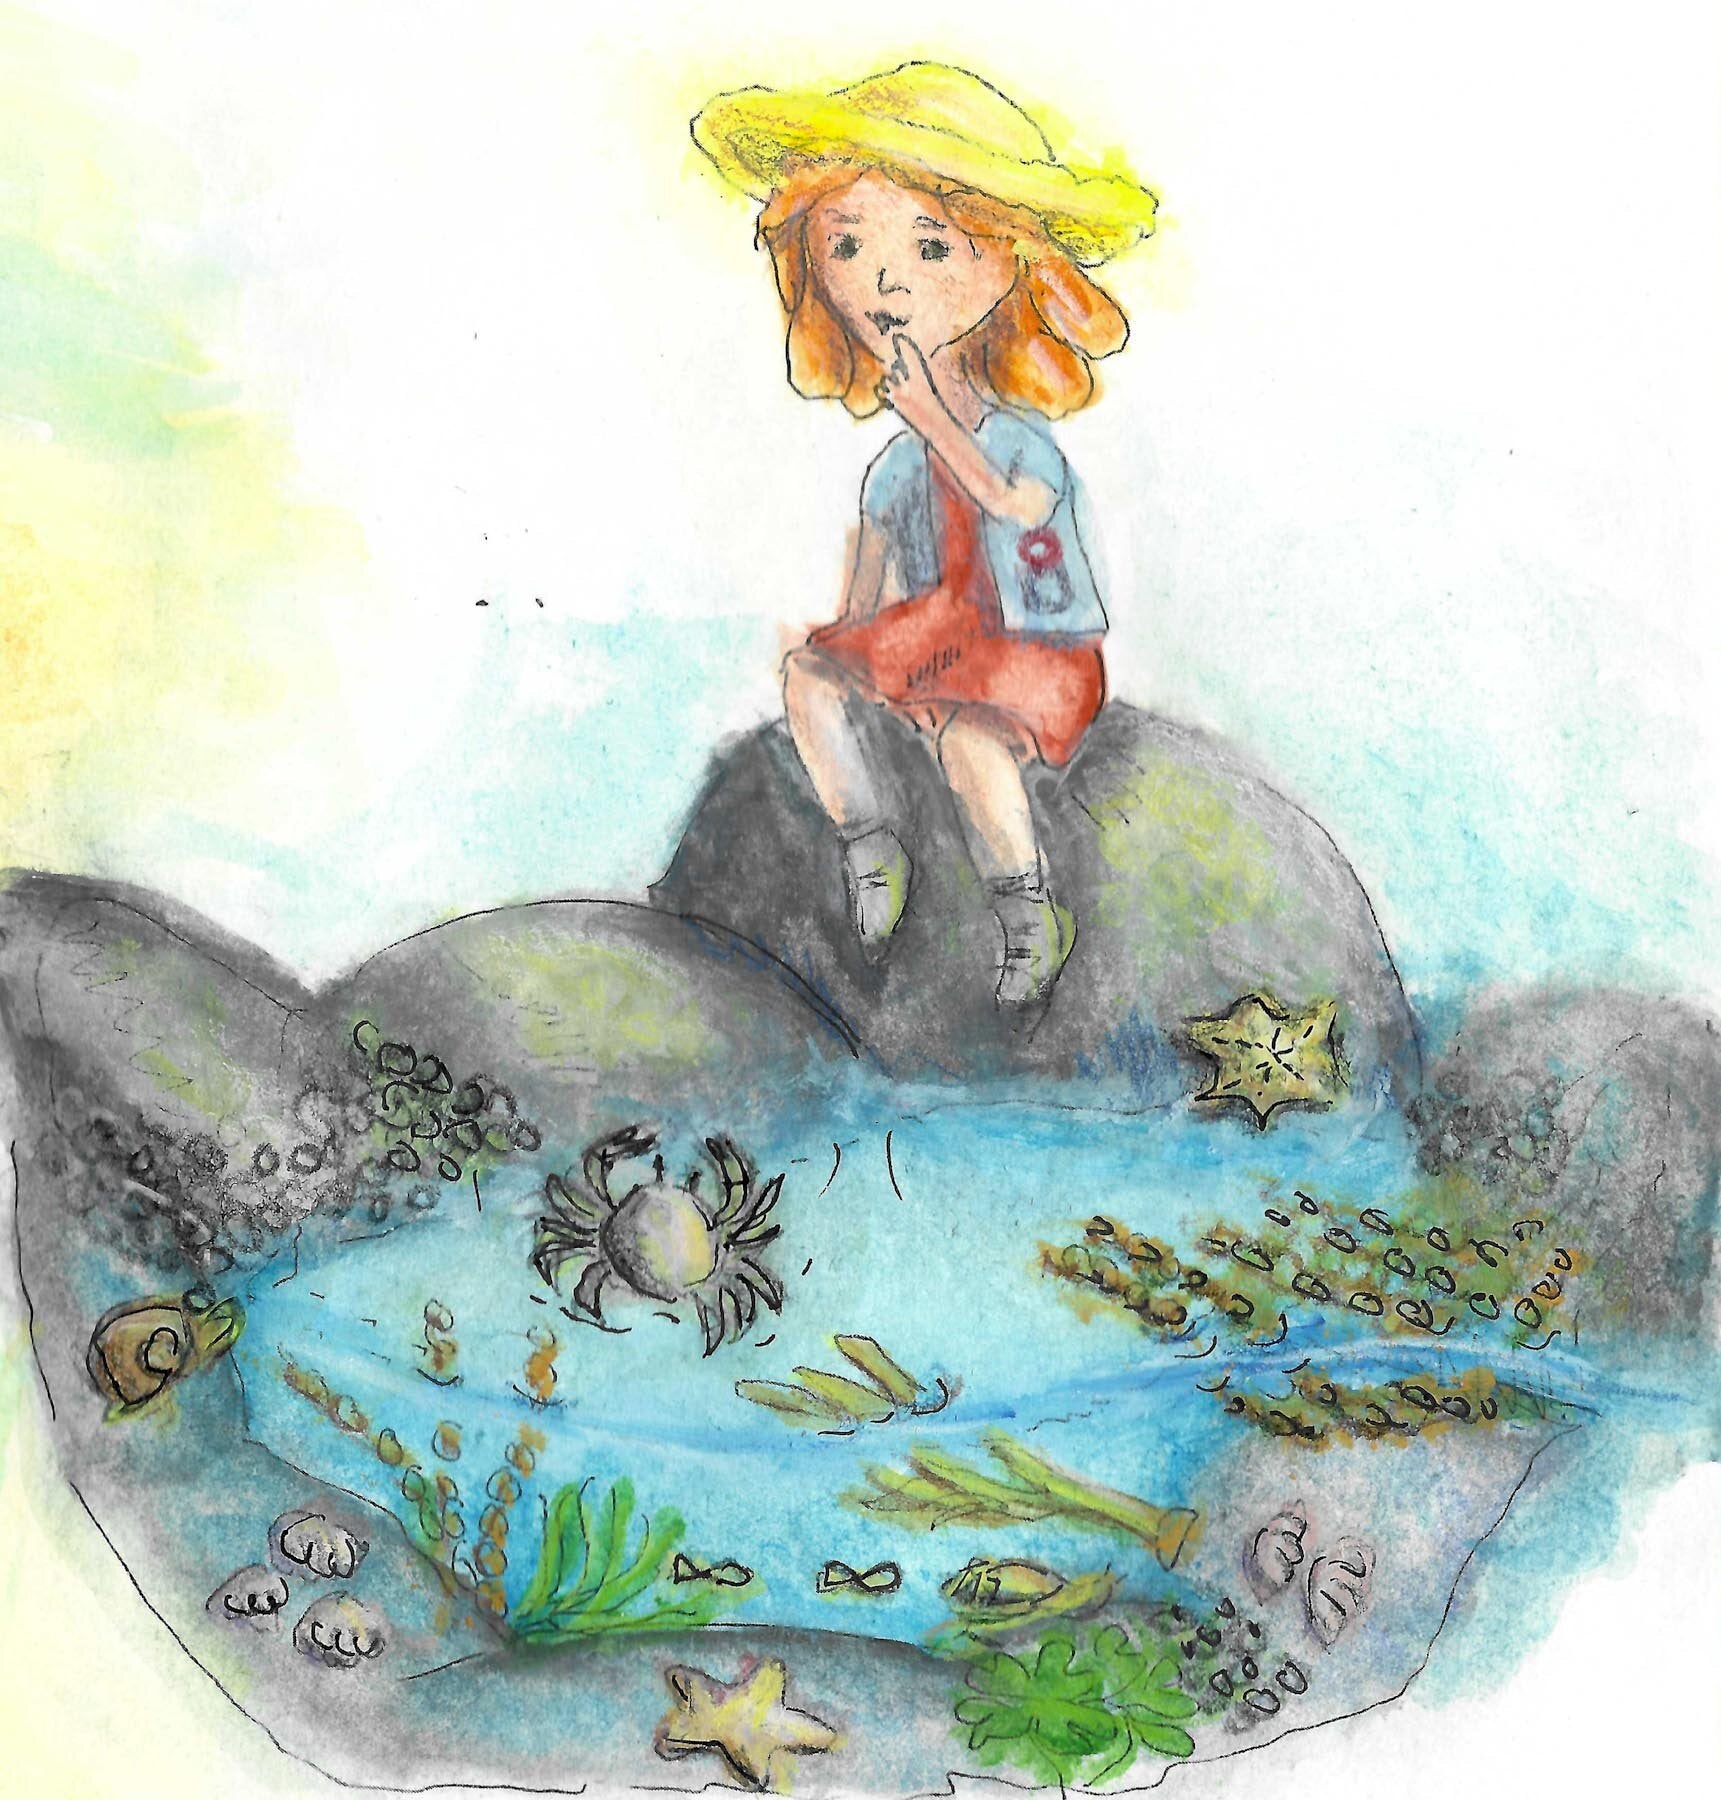 Illustration of girl looking at a rockpool